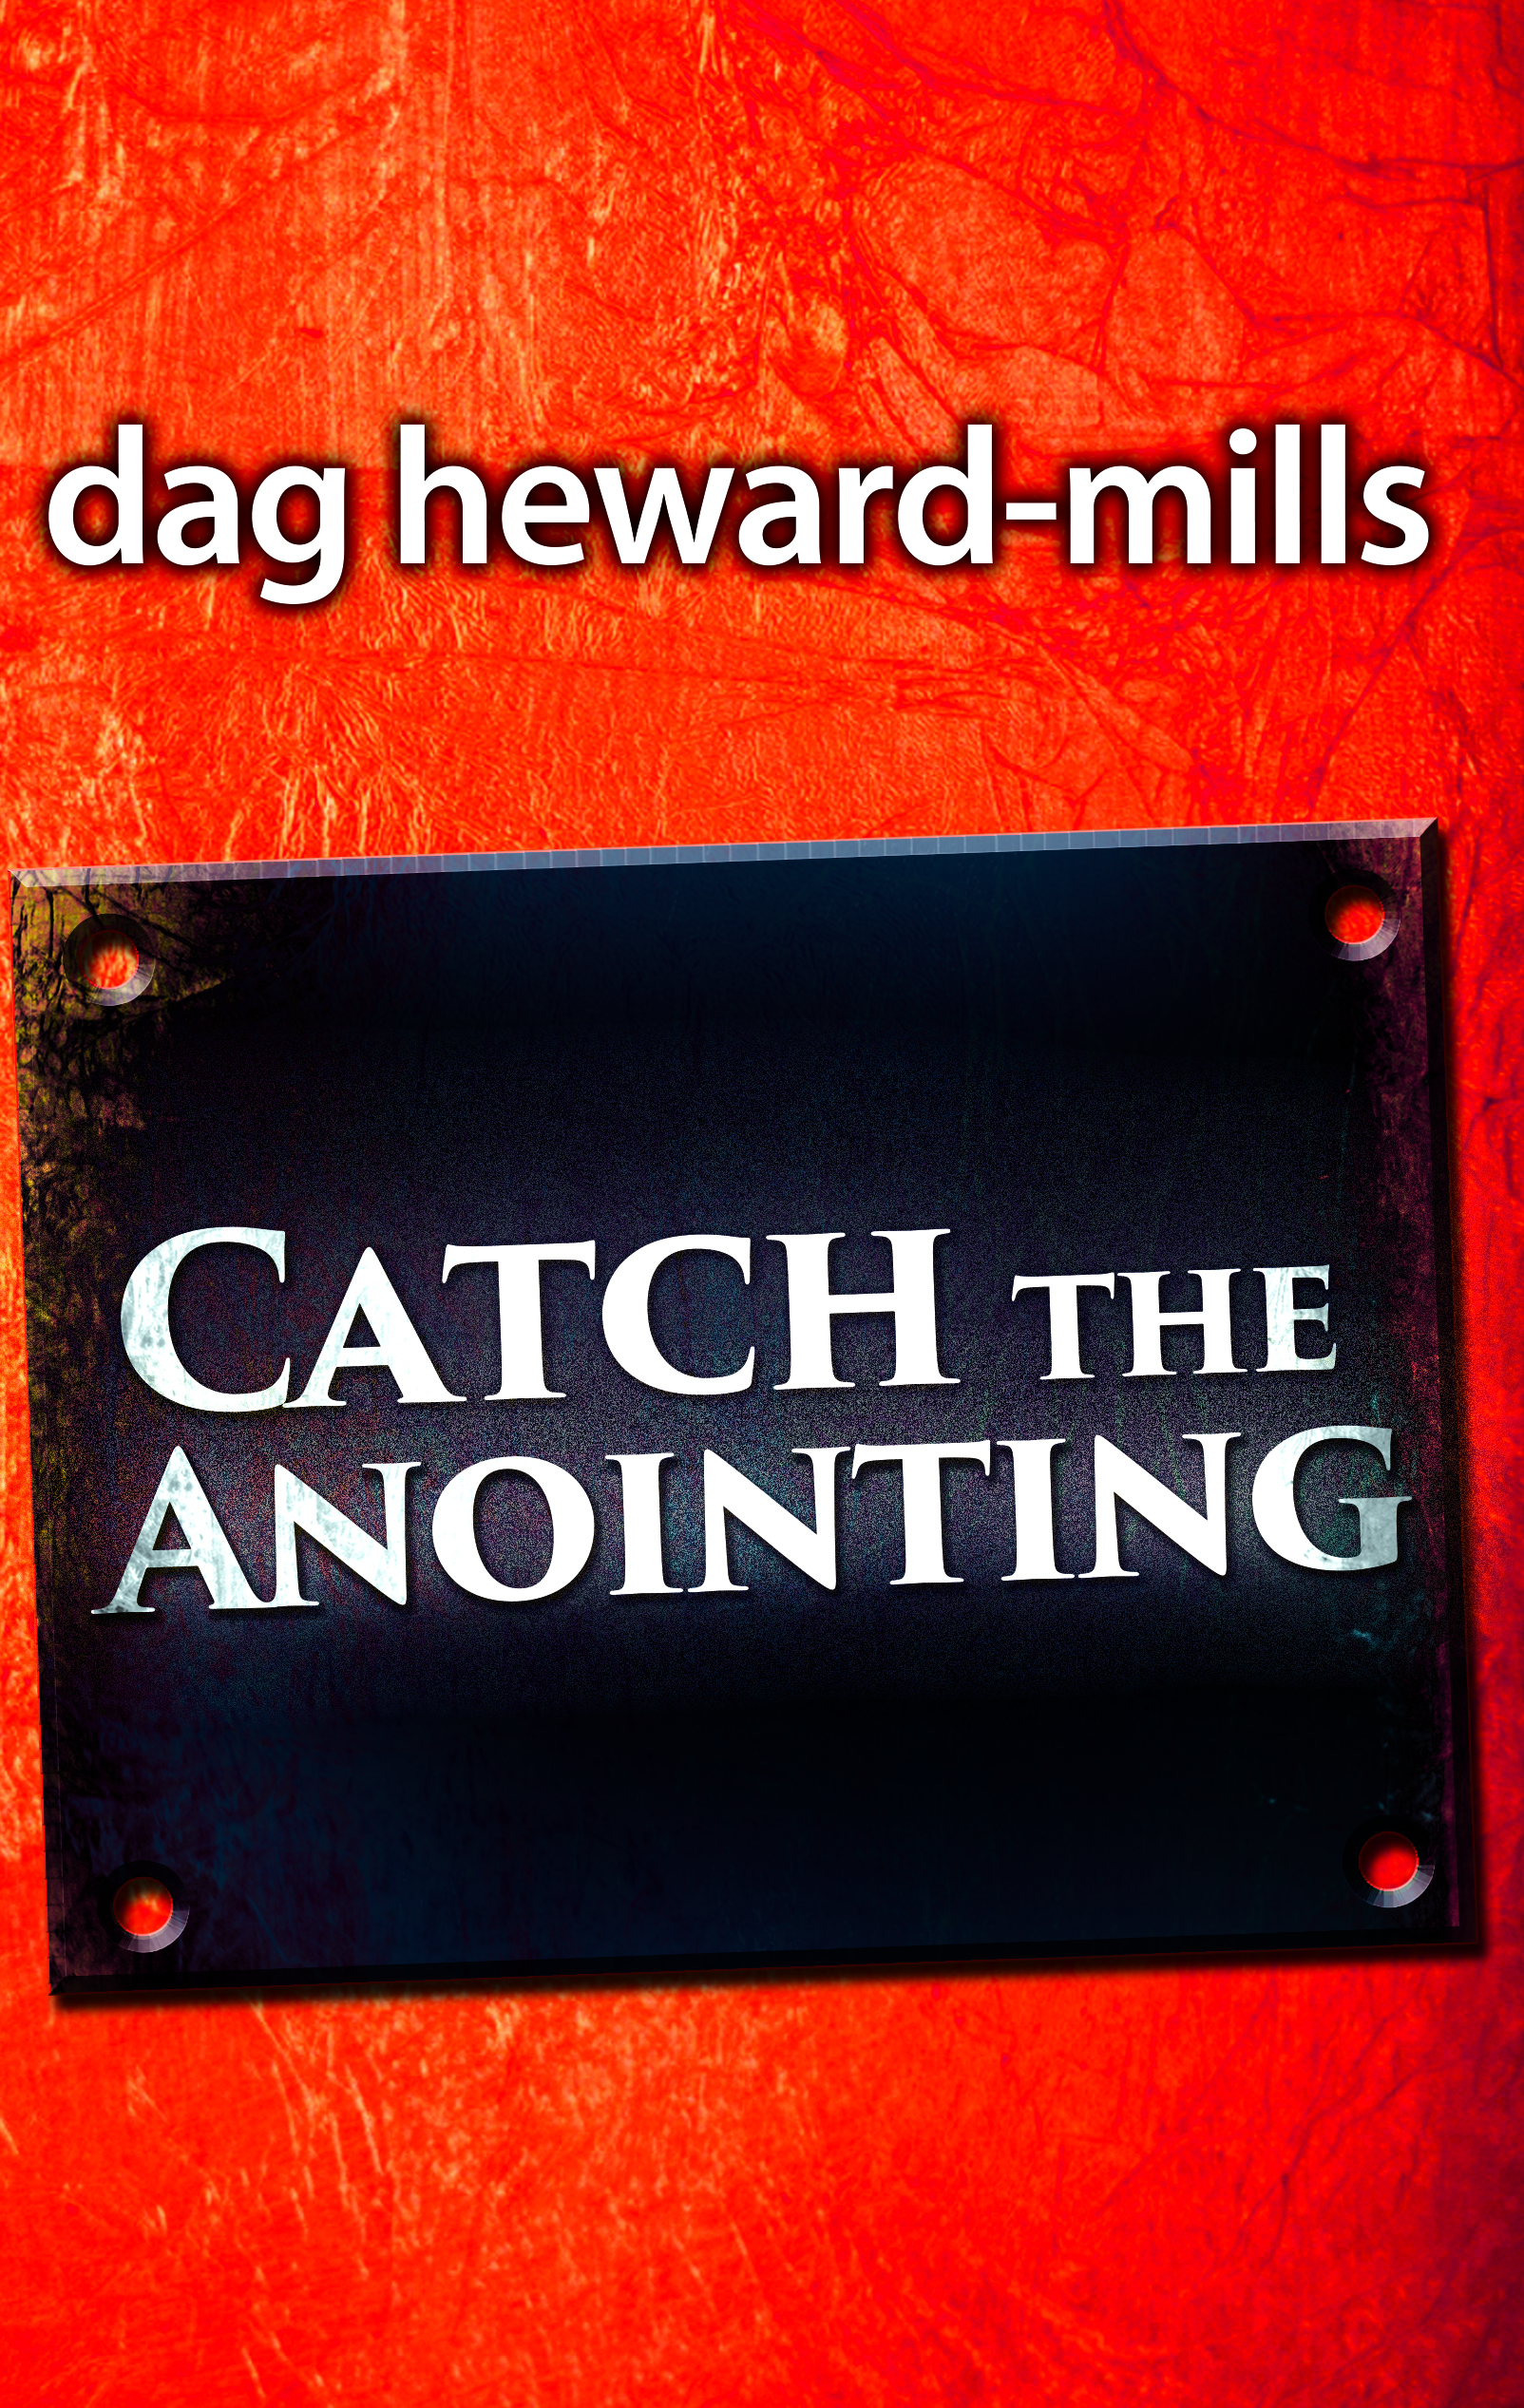 Catch the Anointing by Dag Heward-Mills